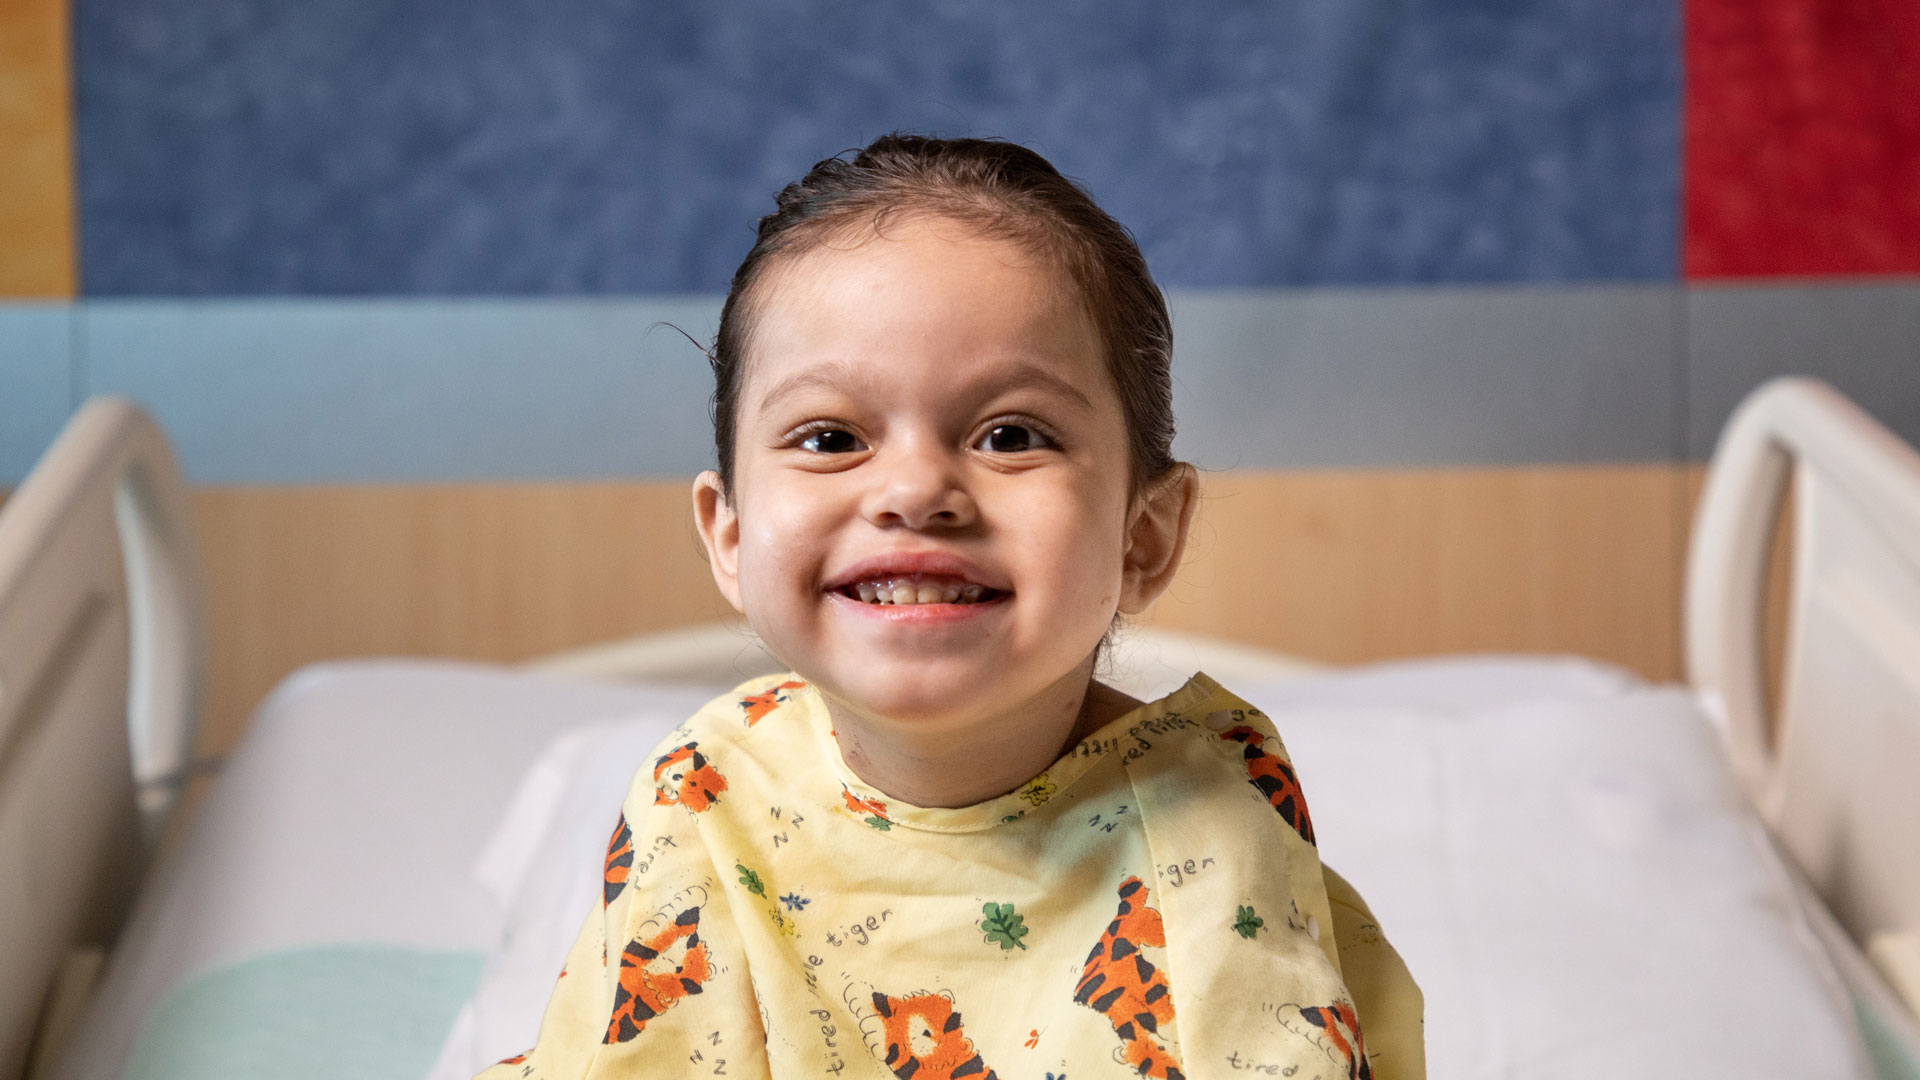 Namiko smiles wide on her hospital bed.